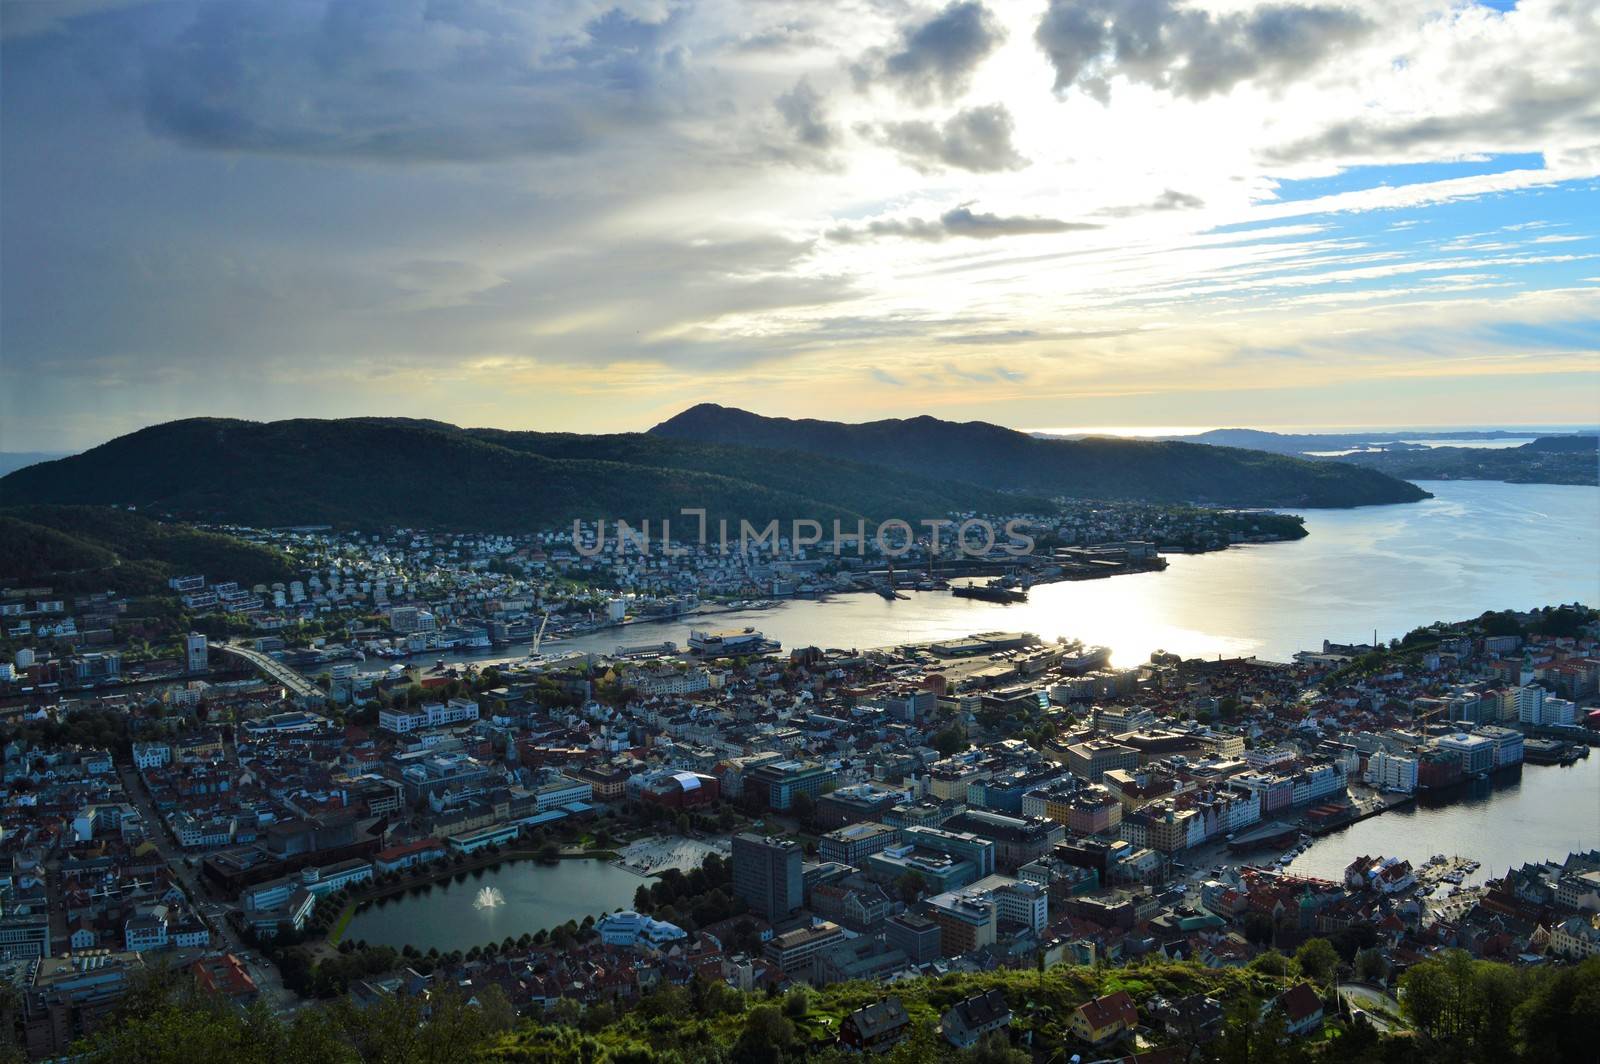 A panoramic image of Bergen taken just after sunset.